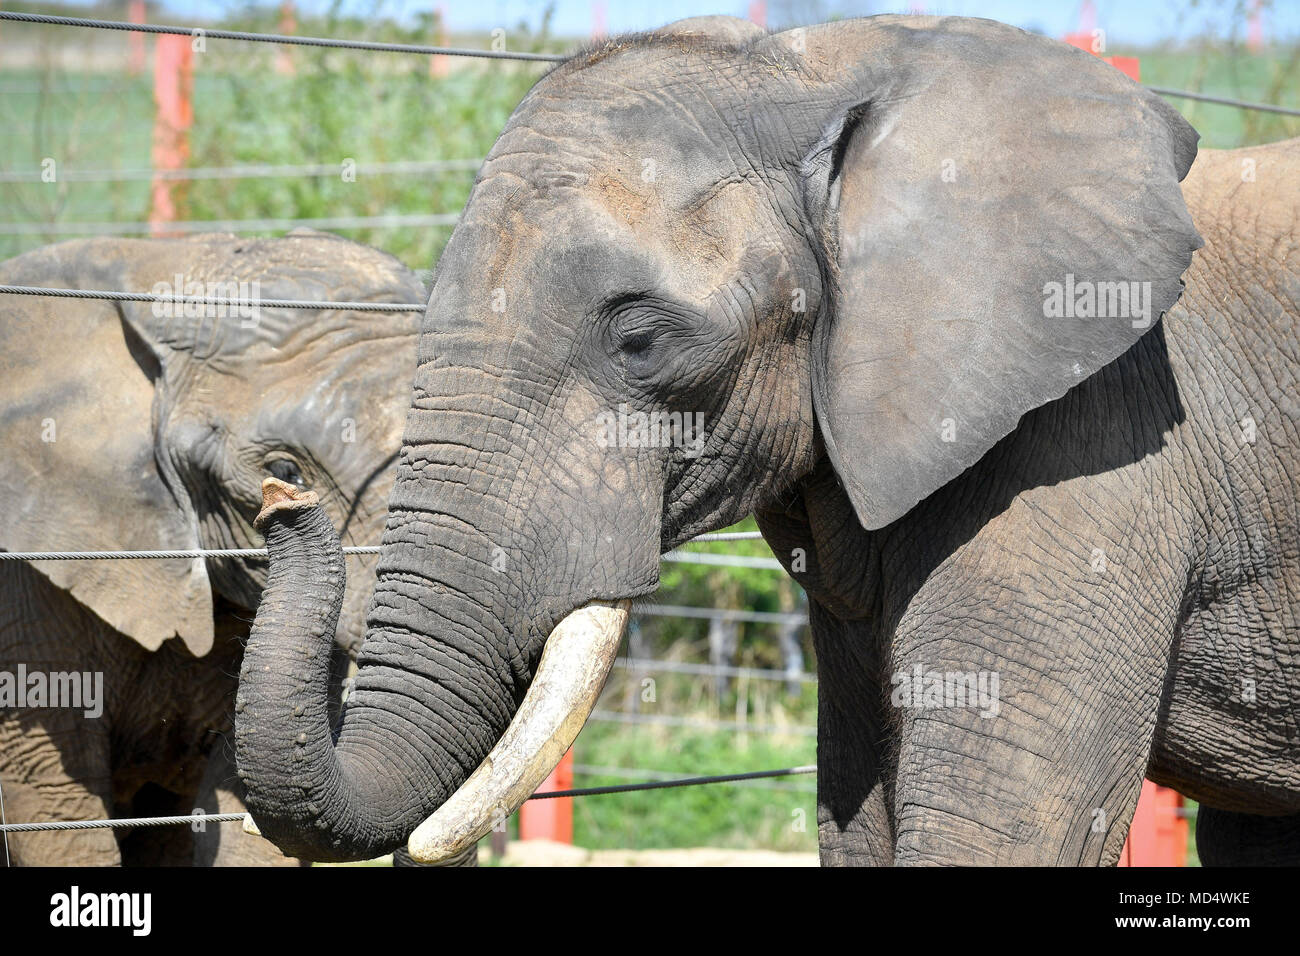 Shaka, the 26 year old African Bull Elephant, meets one of his fellow bachelors, M'Changa, at Noahs Ark Zoo Farm, Somerset, where Shaka is the latest addition to the UK's only African Elephant bachelor group as part of the European Endangered Species Programme, where for the first time in Europe three male elephants have been housed together in a captive environment. Stock Photo